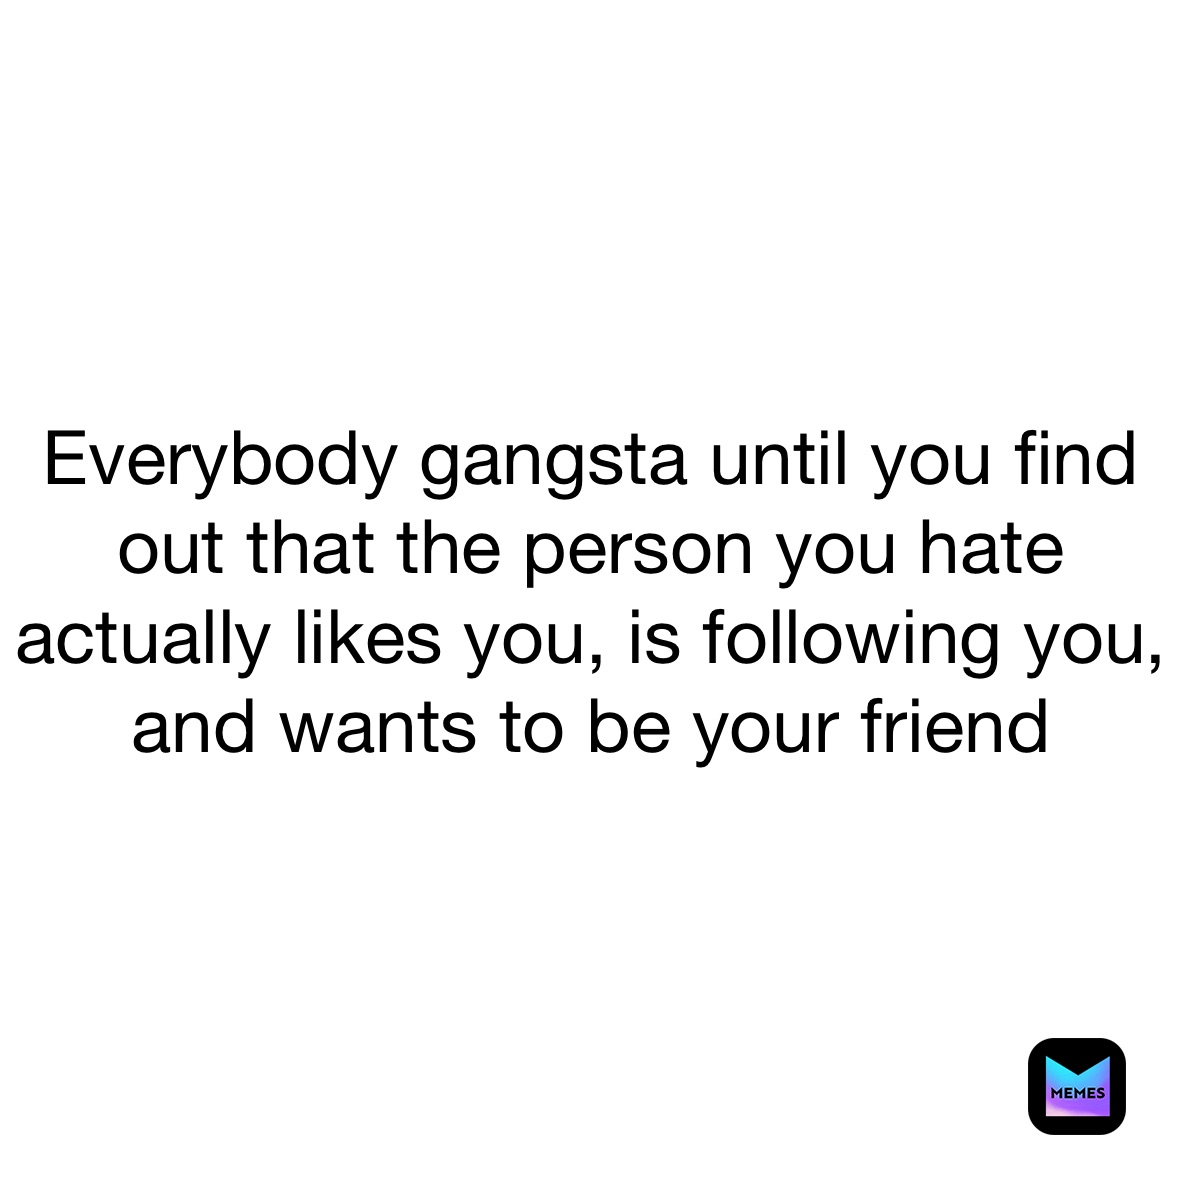 Everybody gangsta until you find out that the person you hate actually likes you, is following you, and wants to be your friend 